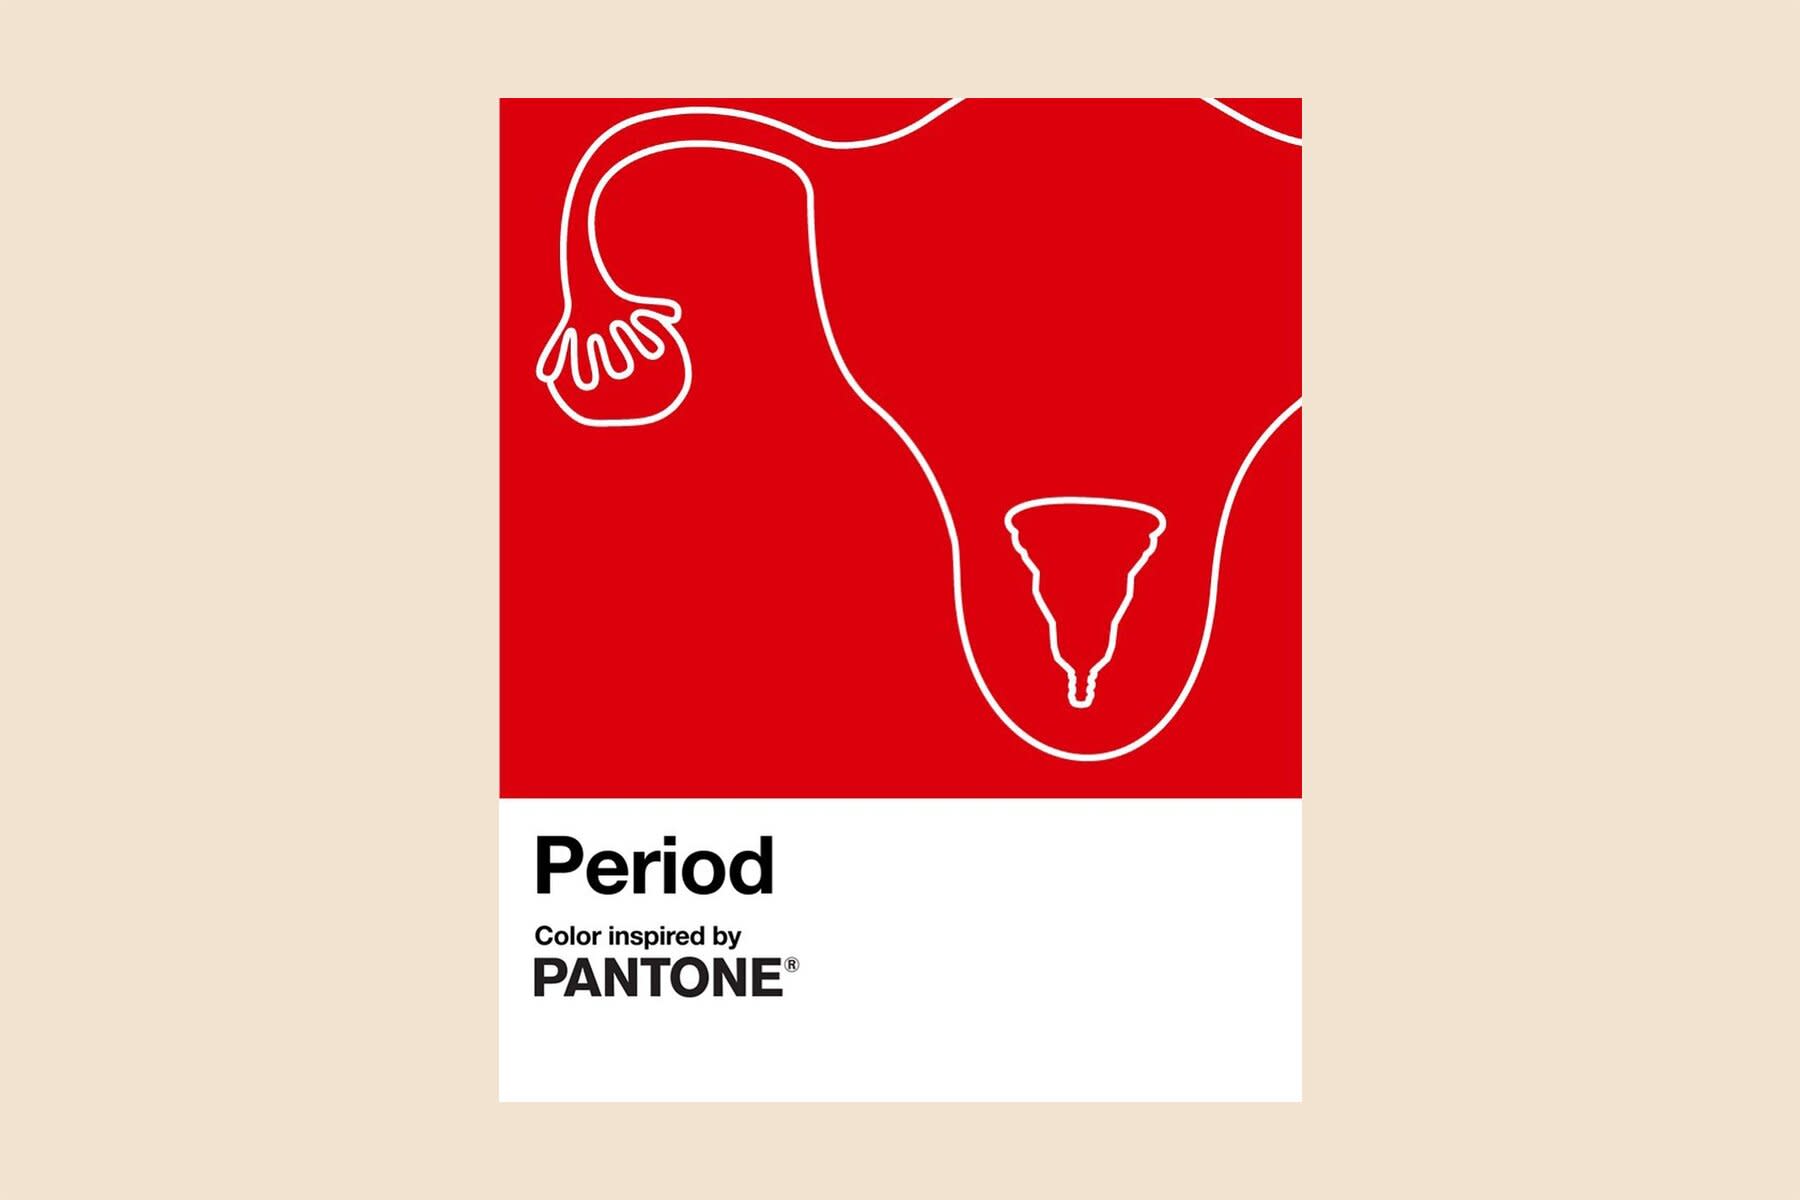 Pantone Released A New Red Shade Called “period” In Hopes